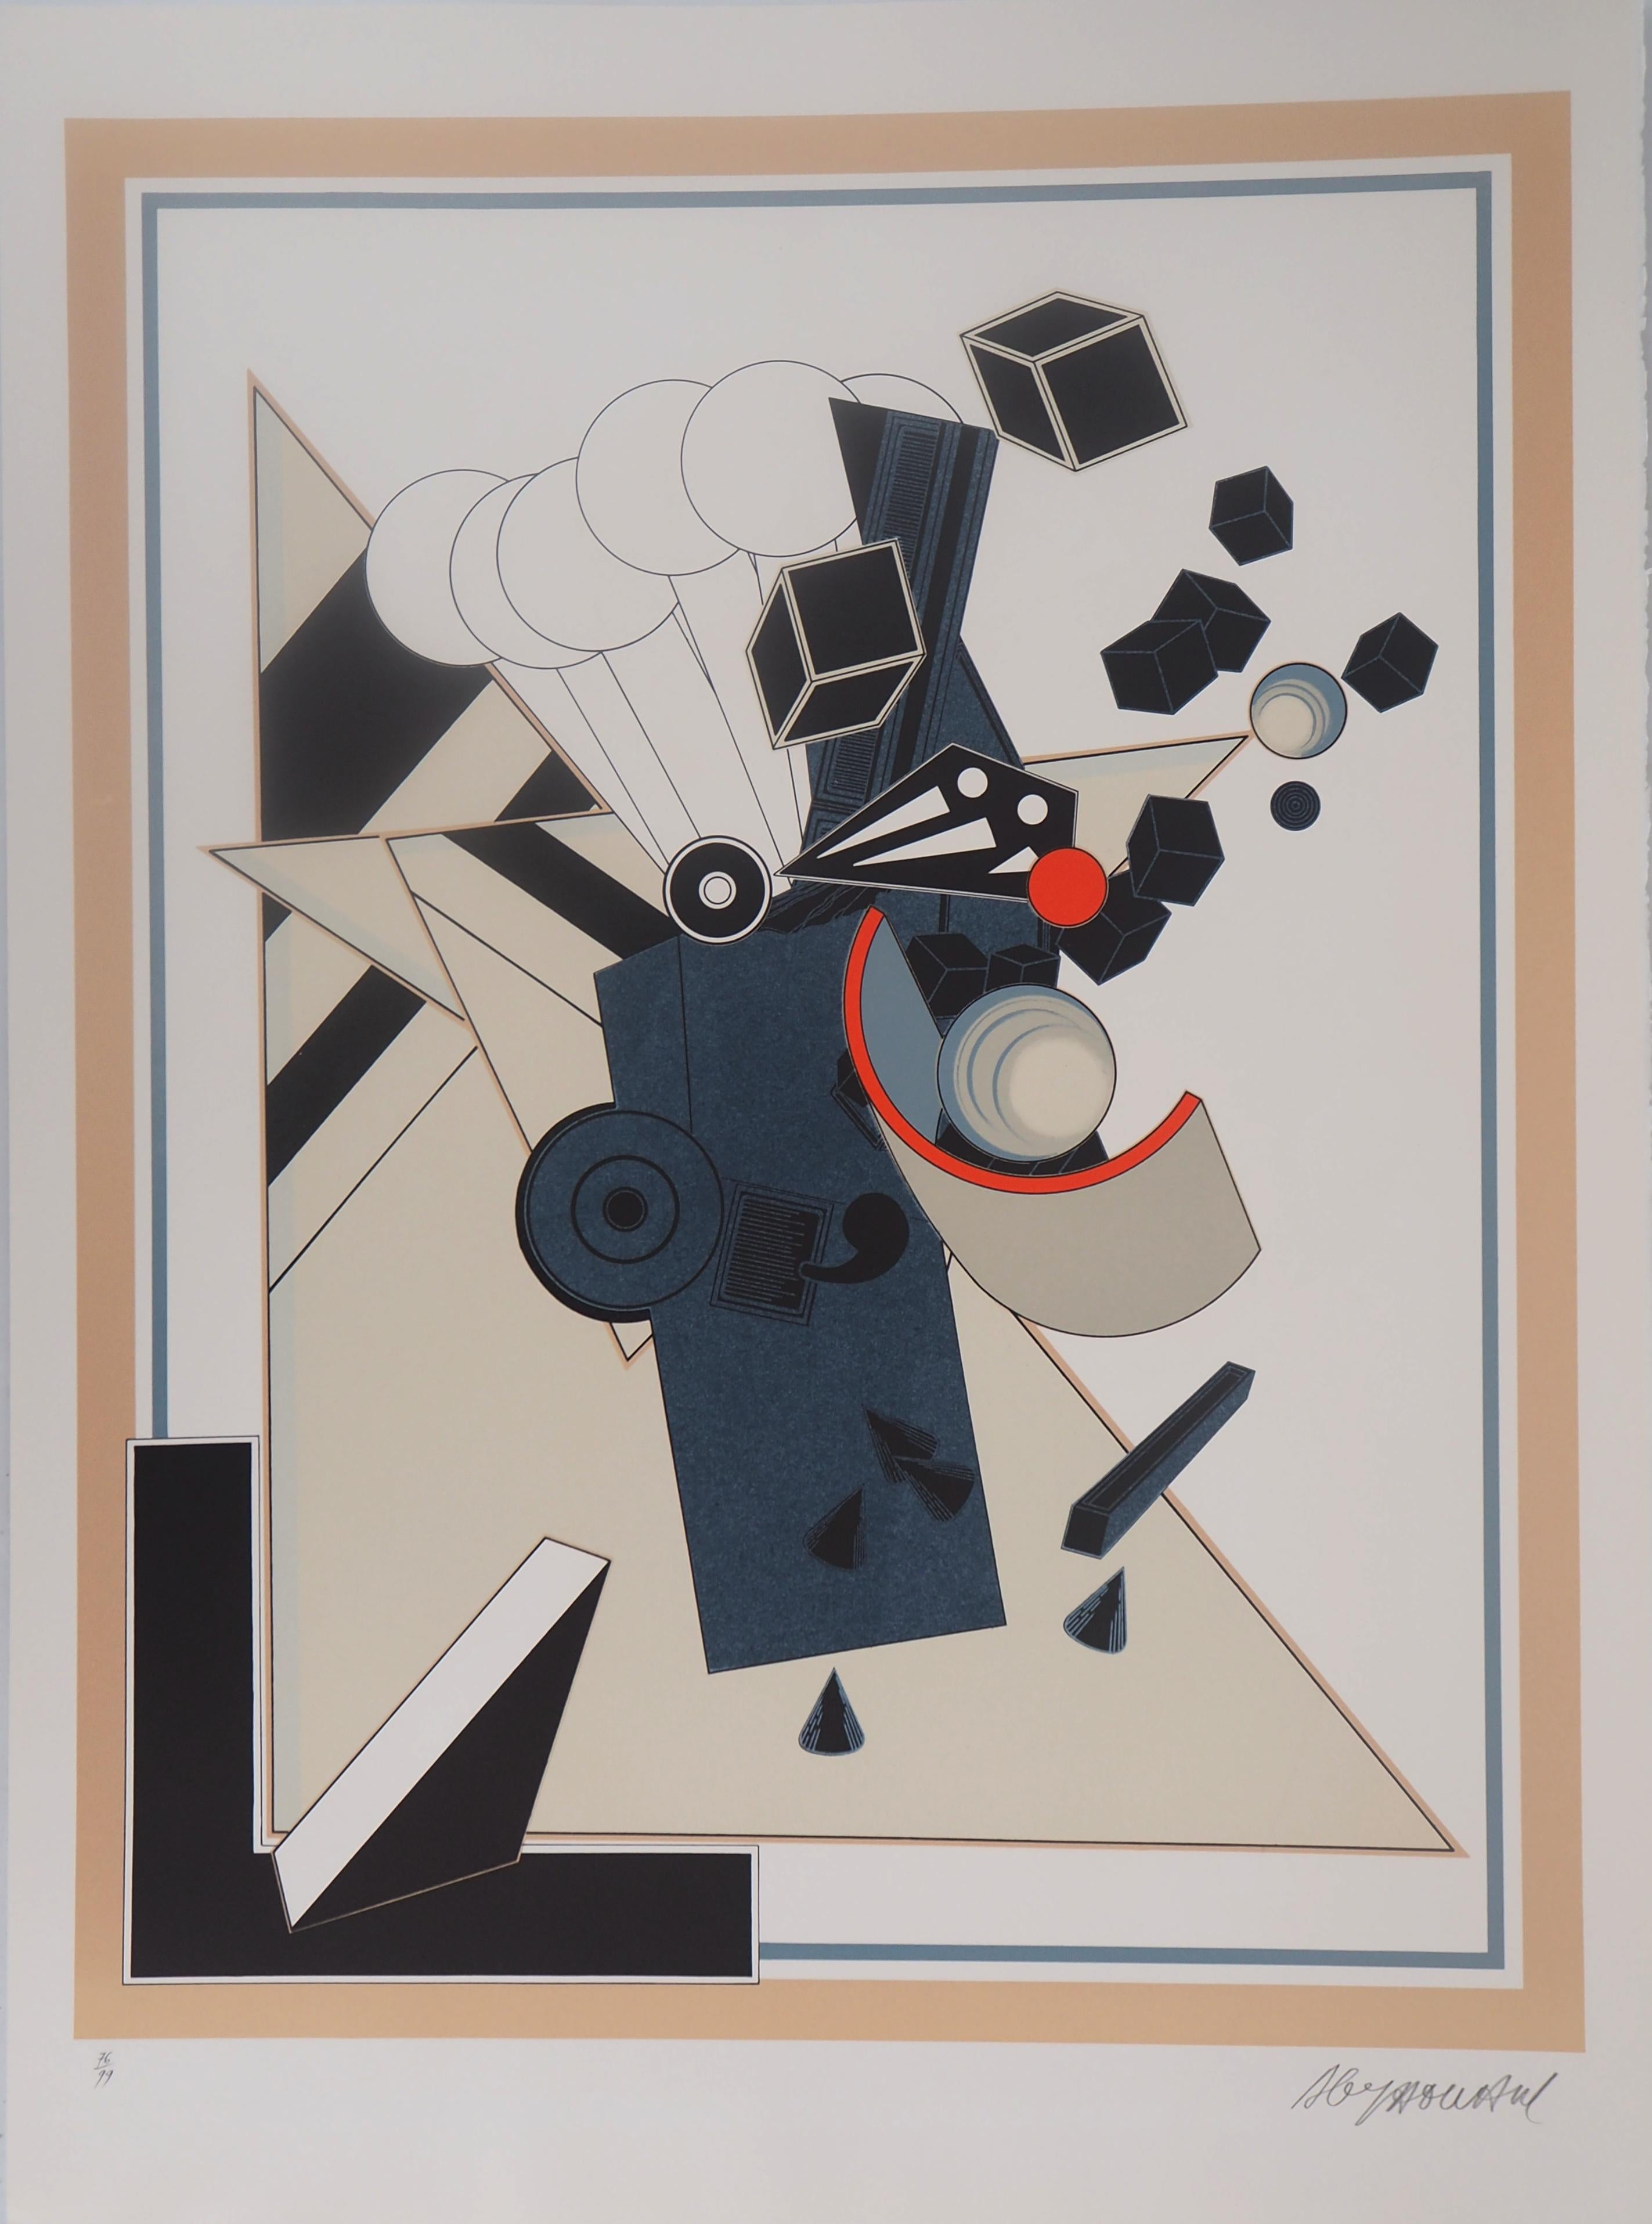 Alain Le Yaouanc Abstract Print - Registering a Dimension - Handsigned Original Lithograph